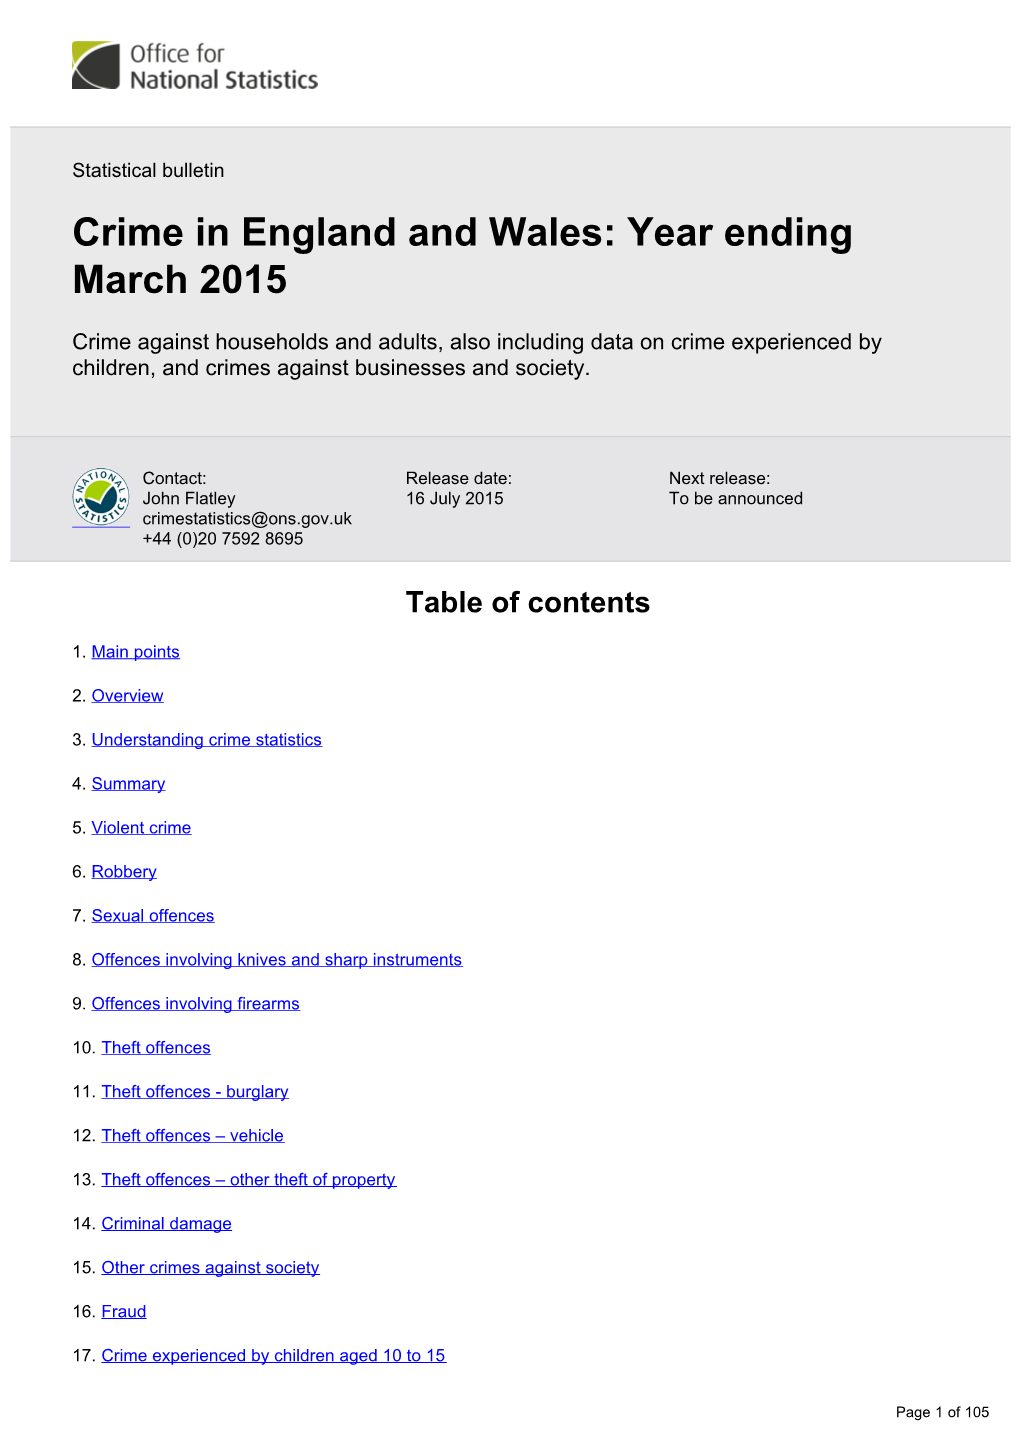 Crime in England and Wales: Year Ending March 2015